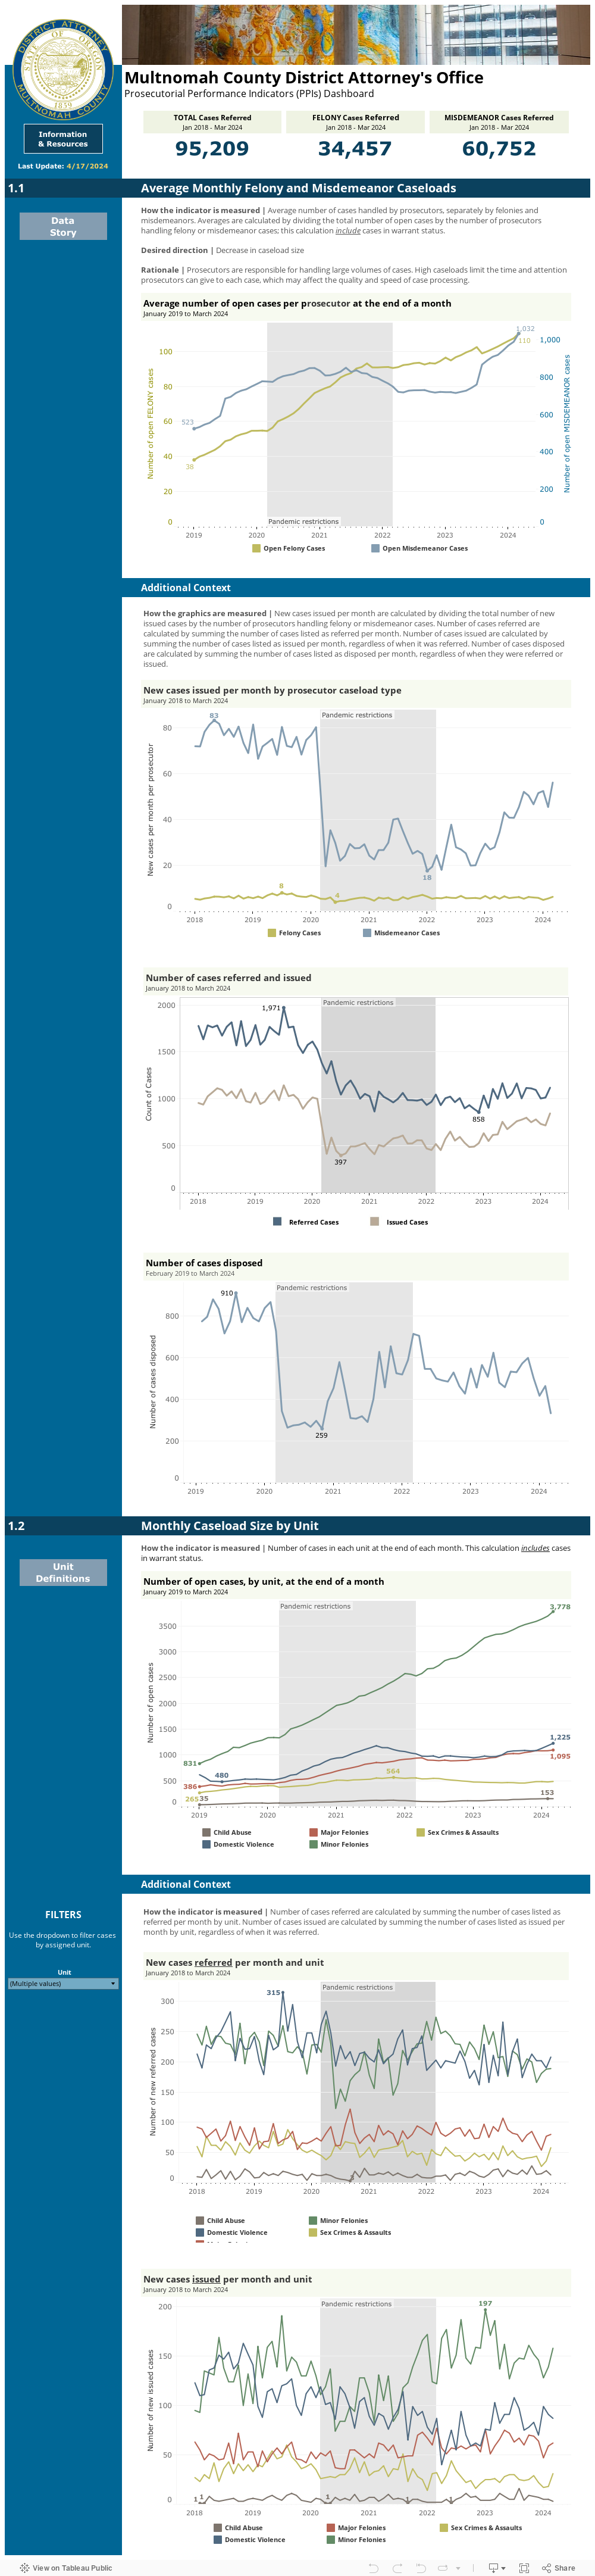                    Multnomah County District Attorney's Office                         Prosecutorial Performance Indicators (PPI) Dashboard
